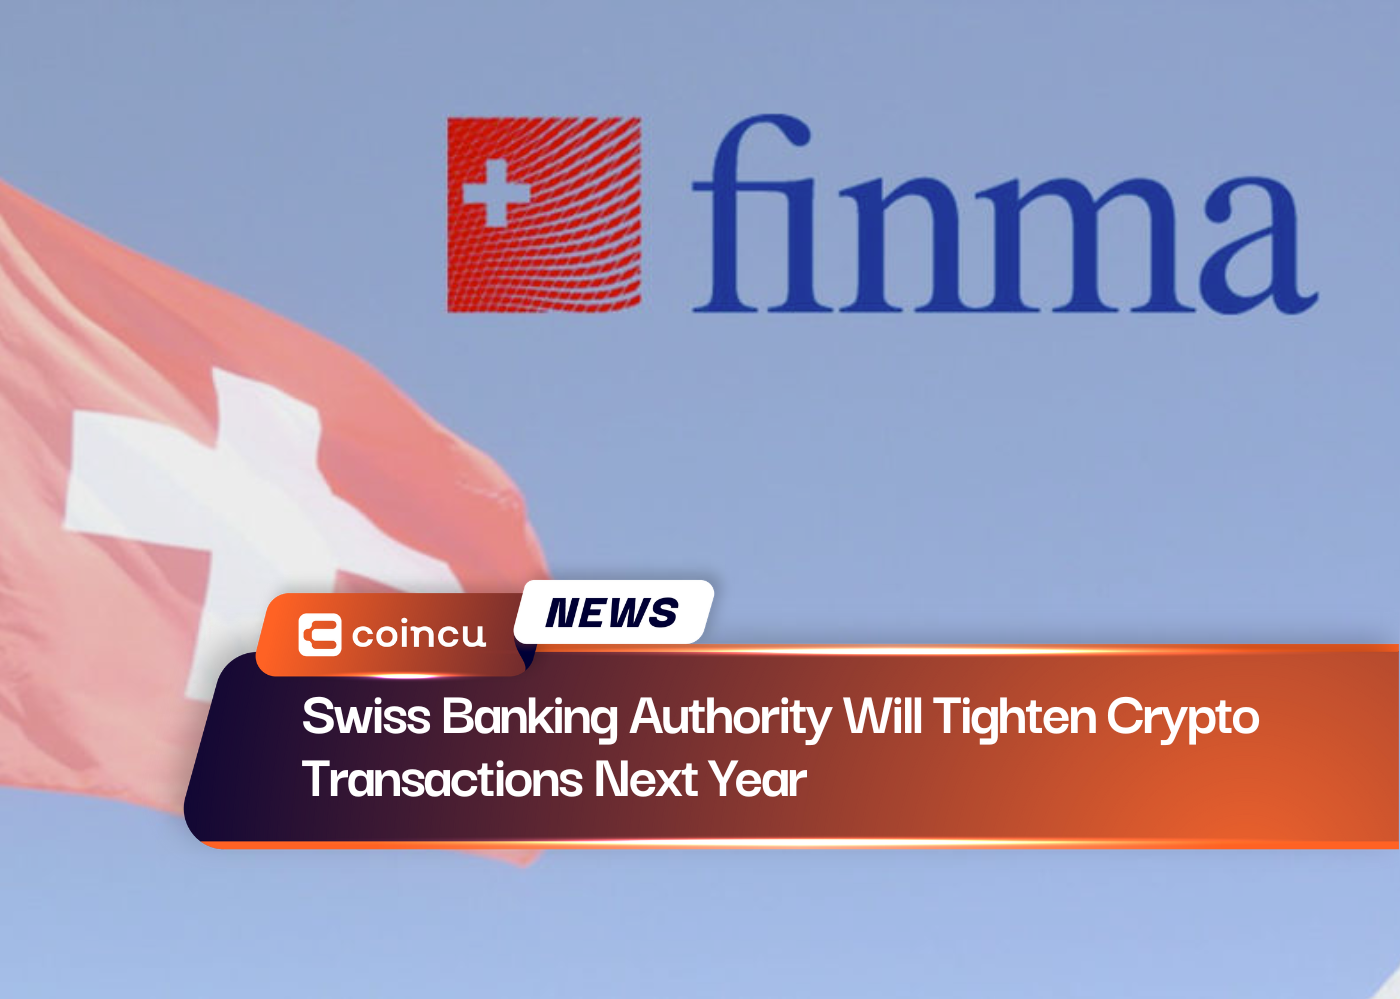 Swiss Banking Authority Will Tighten Crypto Transactions Next Year